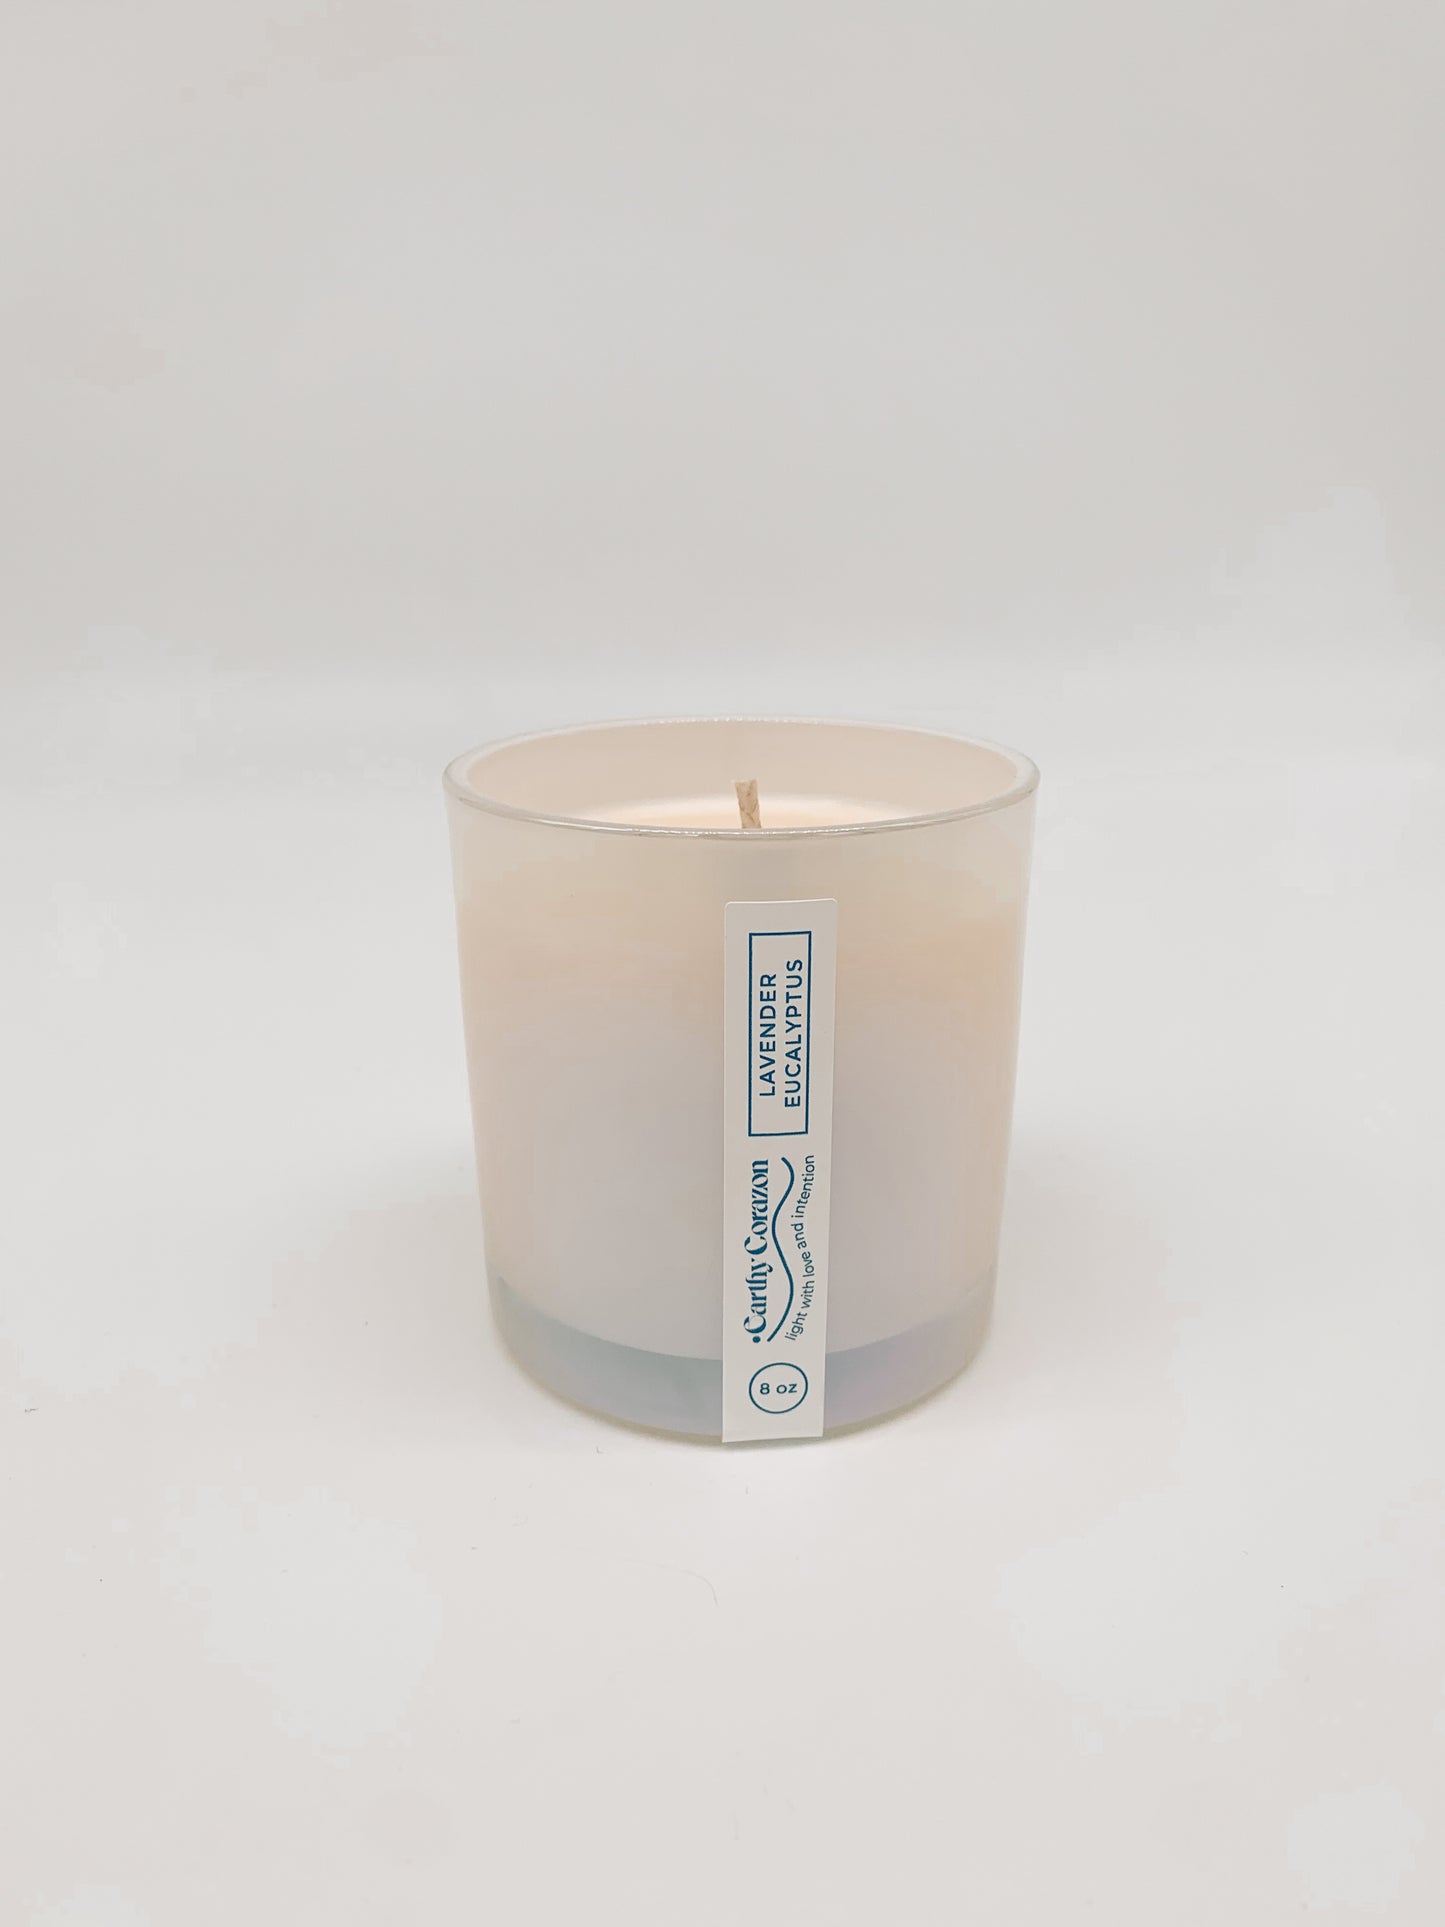 Lavender Eucalyptus - Candle By Earthy Corazon